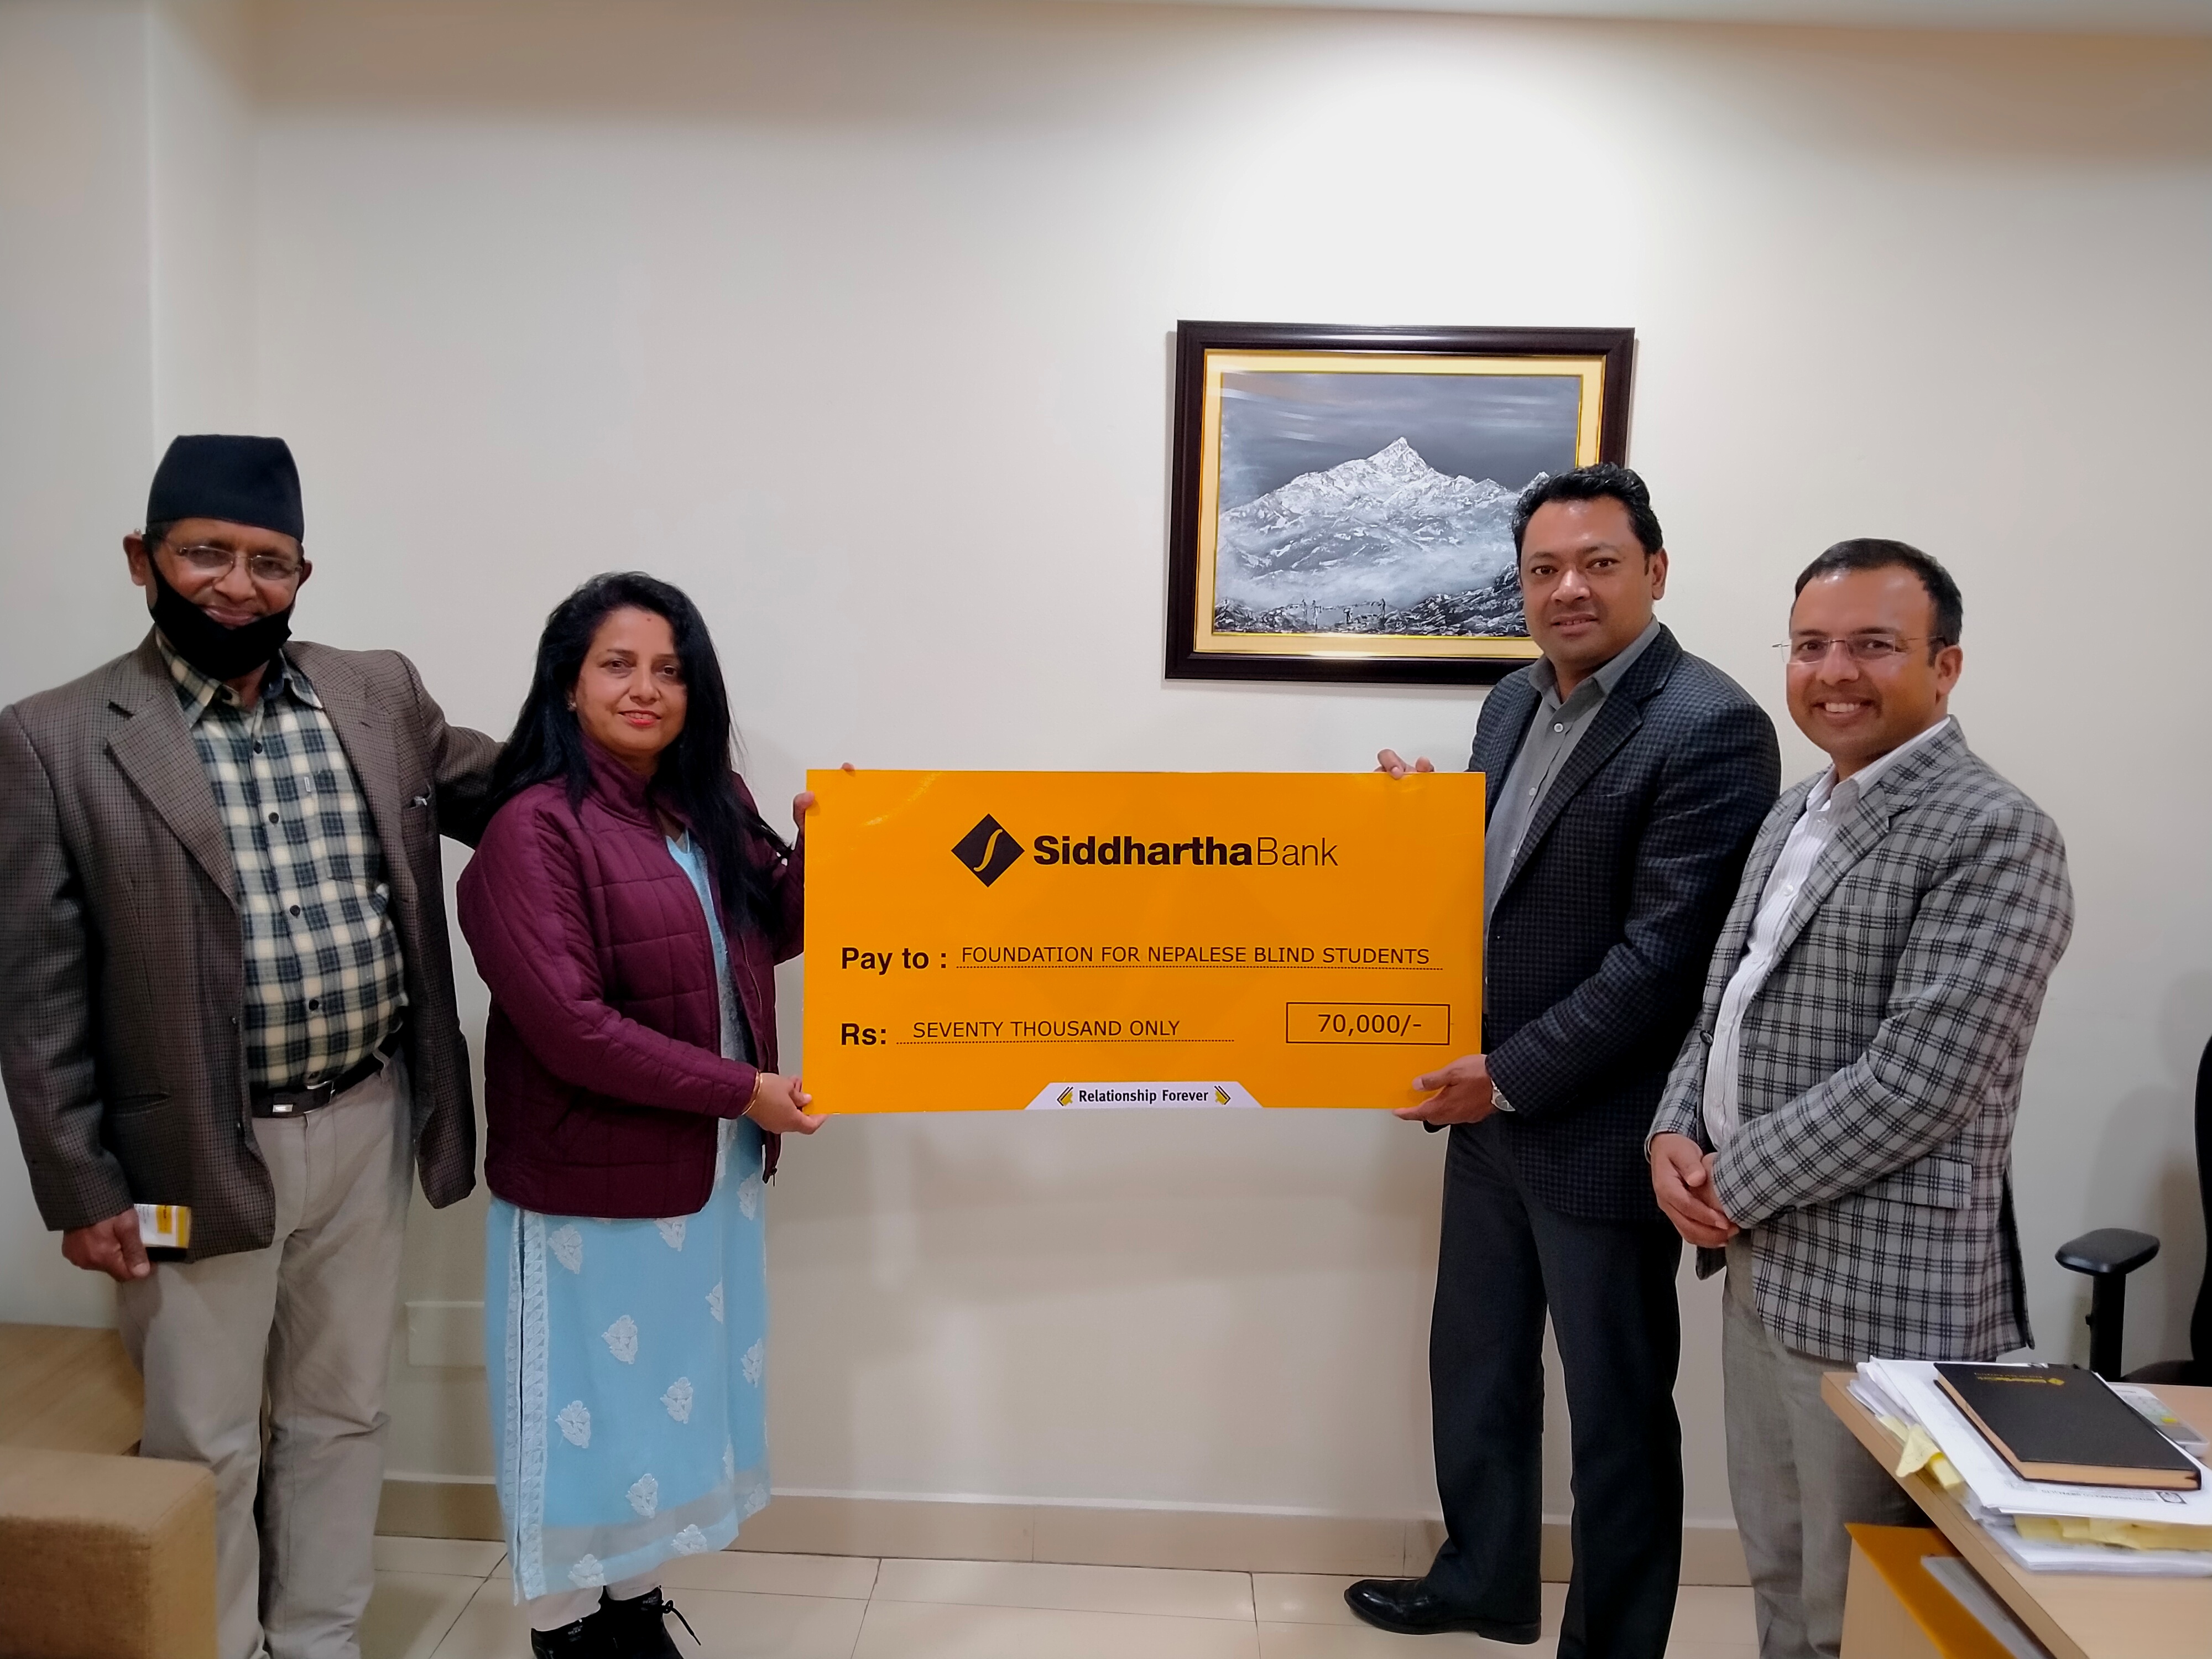 Financial Support to Foundation for Nepalese Blind Students